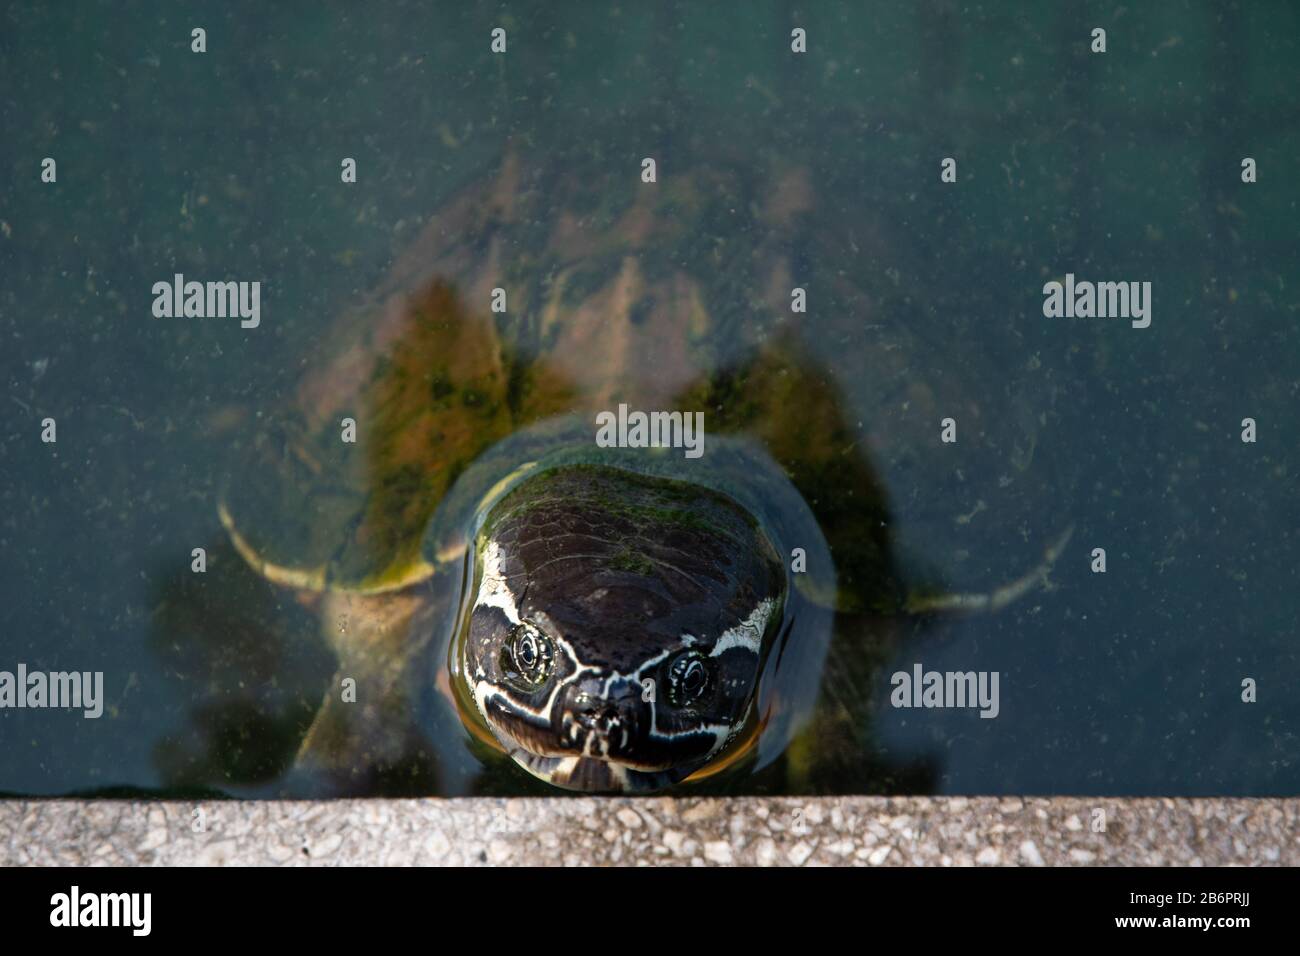 A water turtle looks out of the water Stock Photo